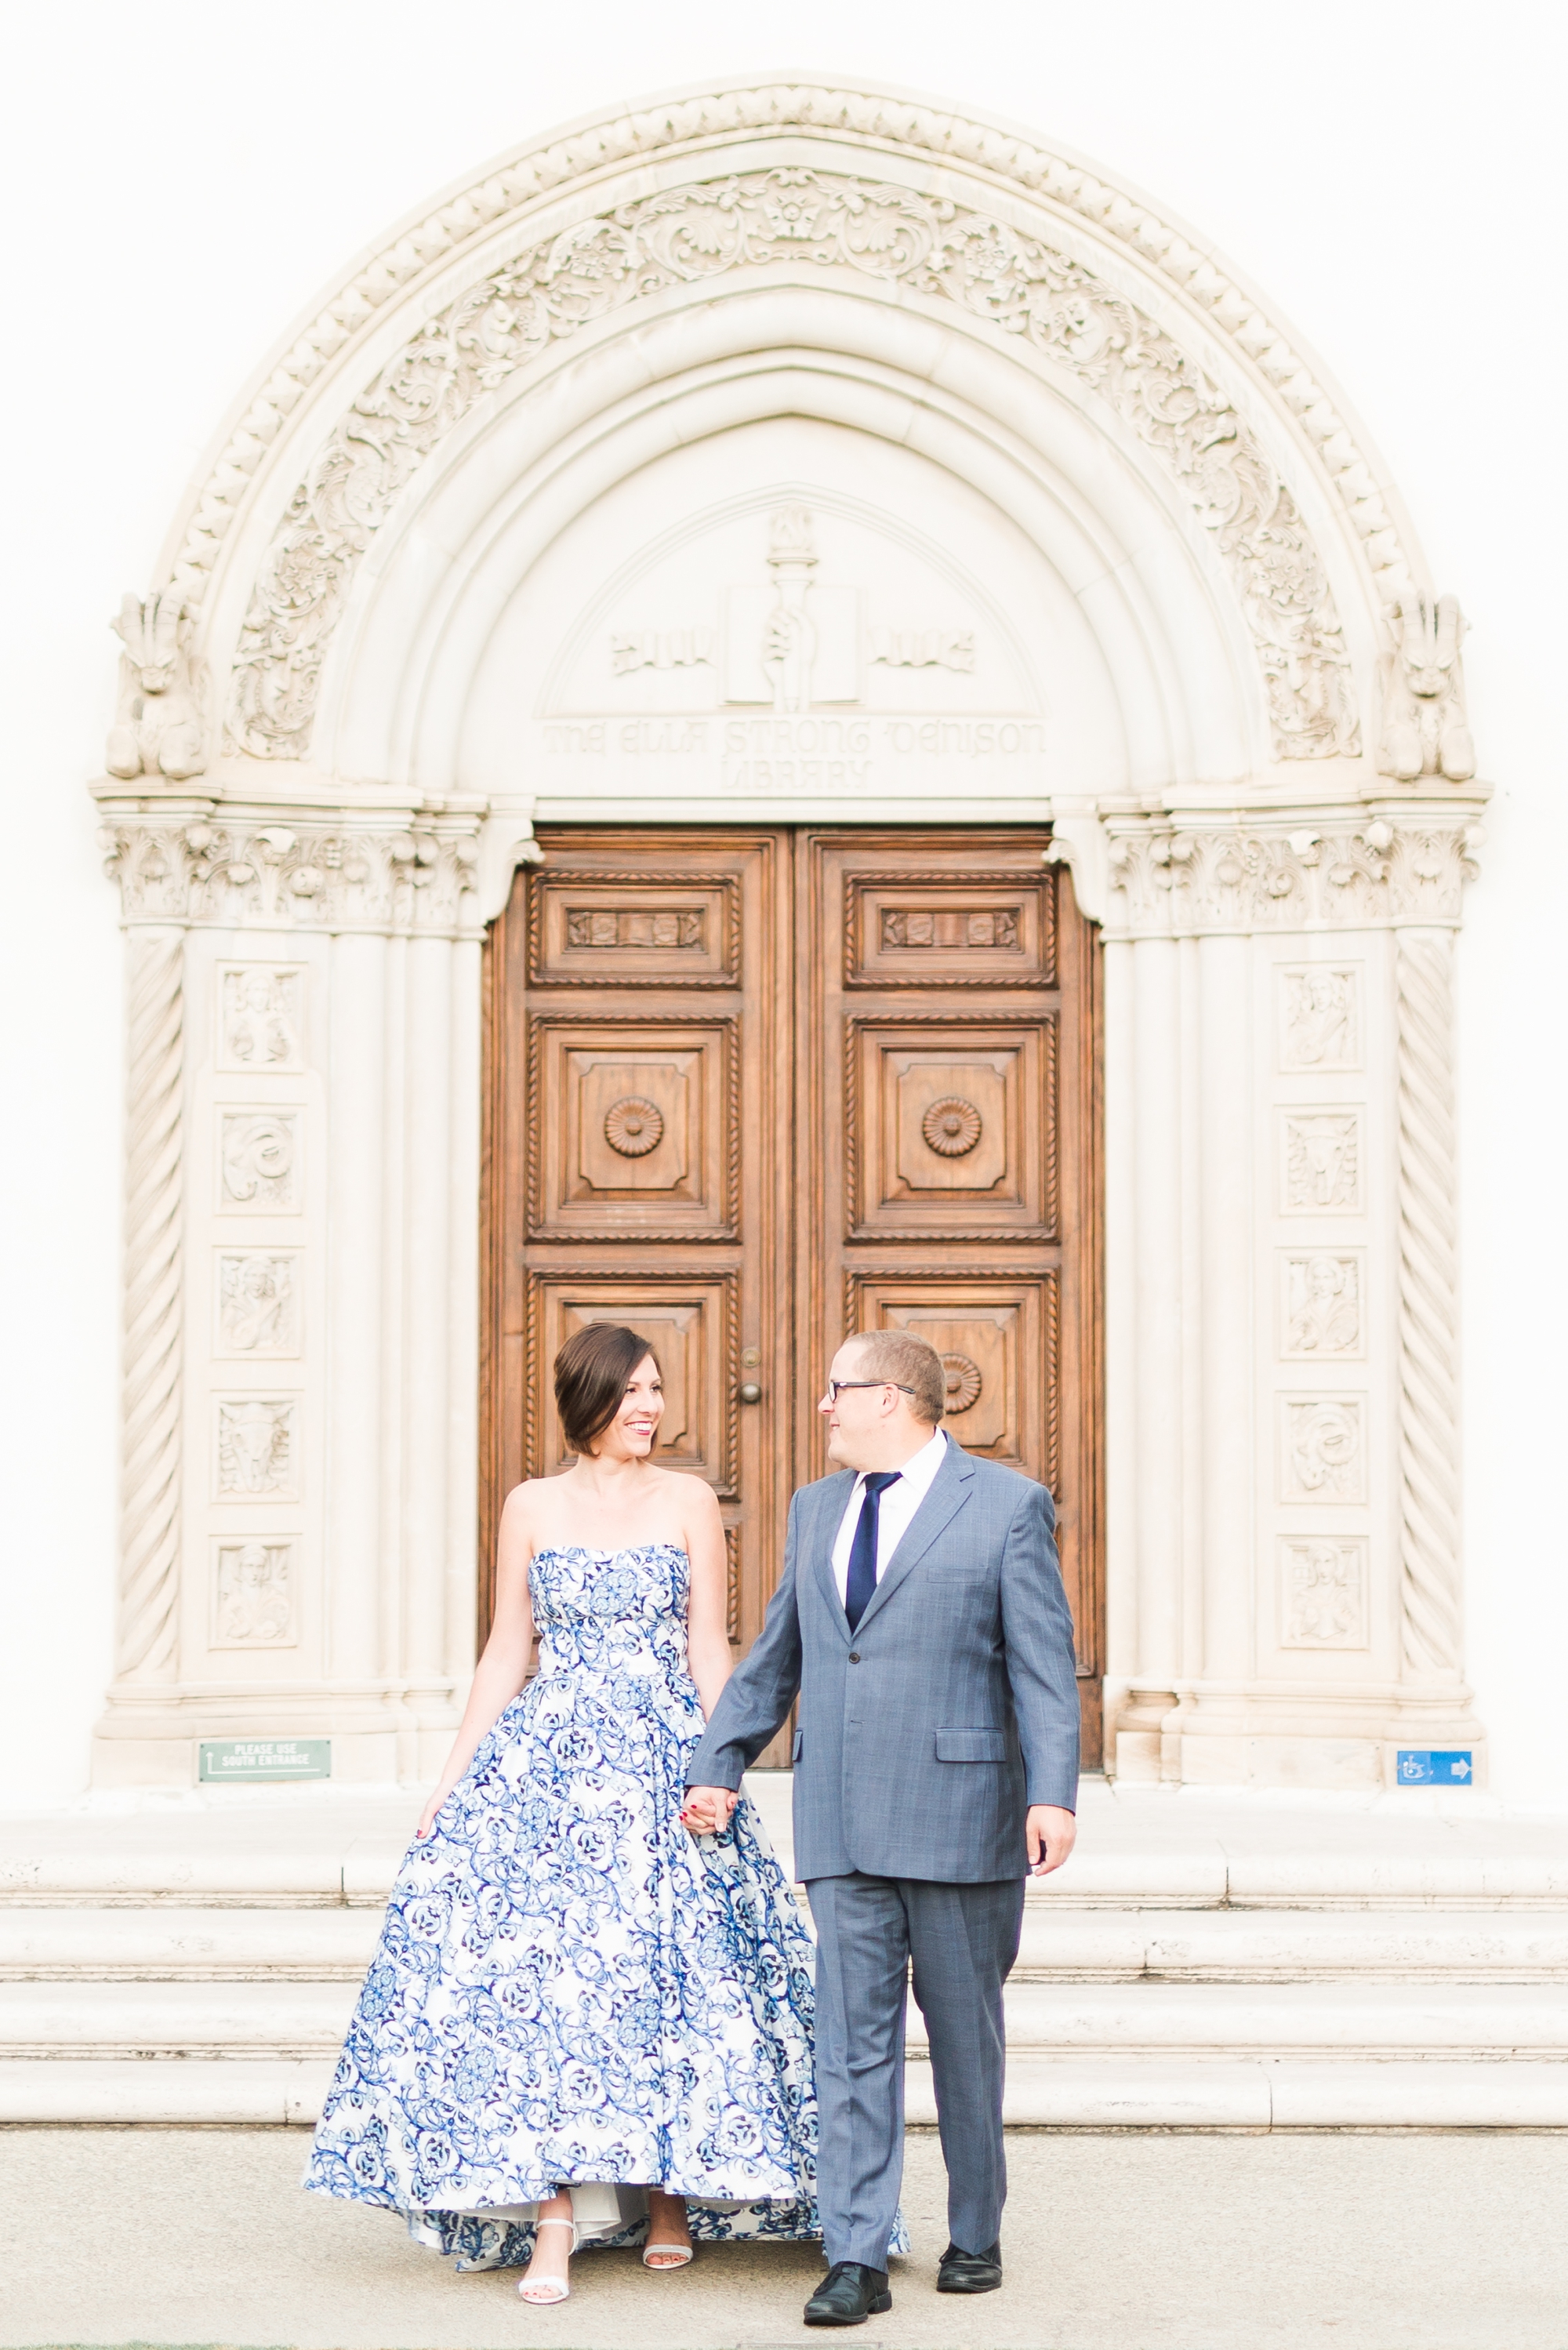 Couples pose in front of large doors with beautiful architecture